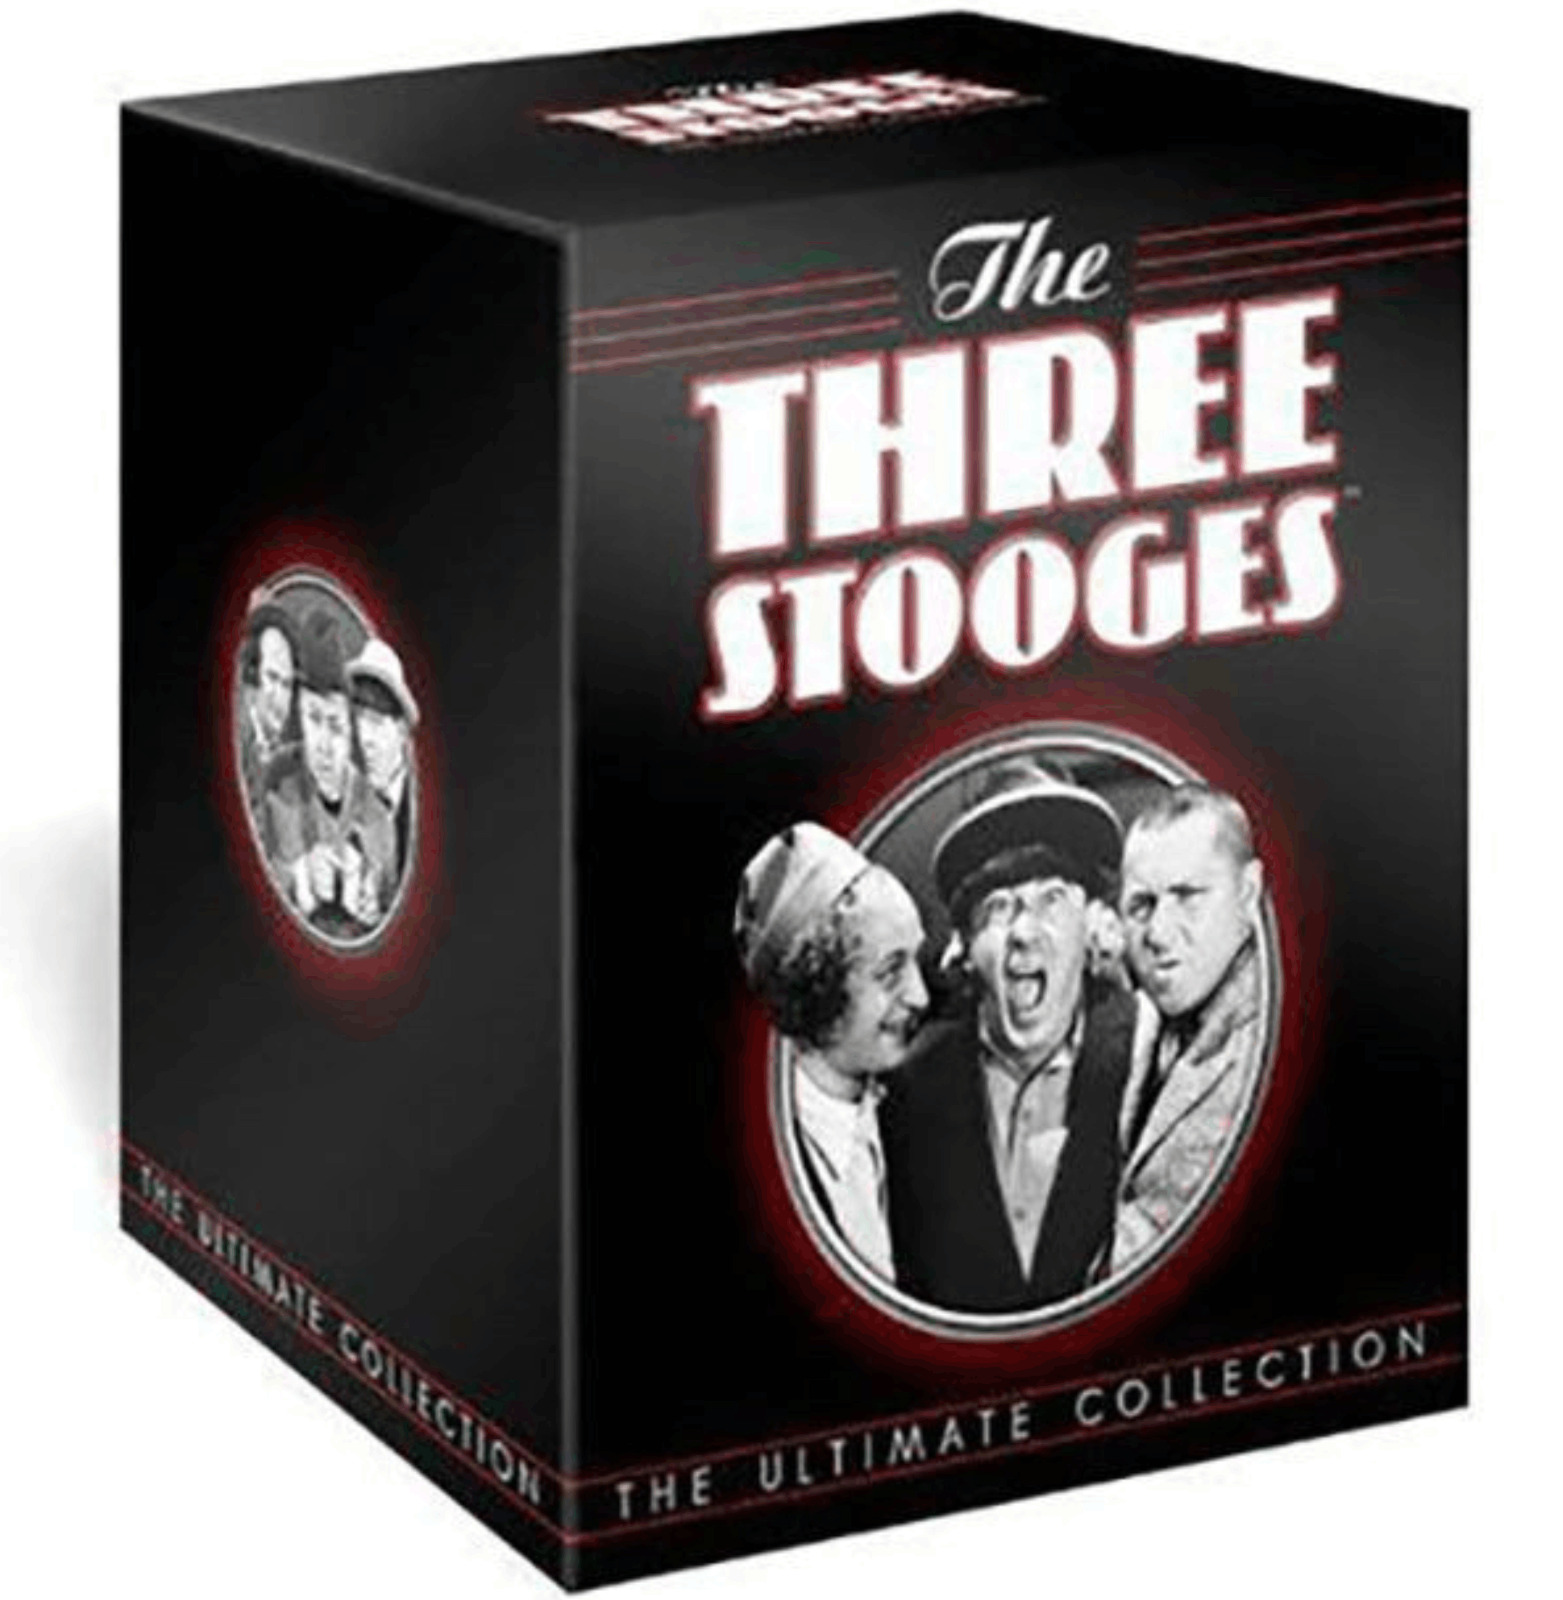  THE 3 THREE STOOGES - The Ultimate Collection (20-Disc) Complete DVD Series NEW